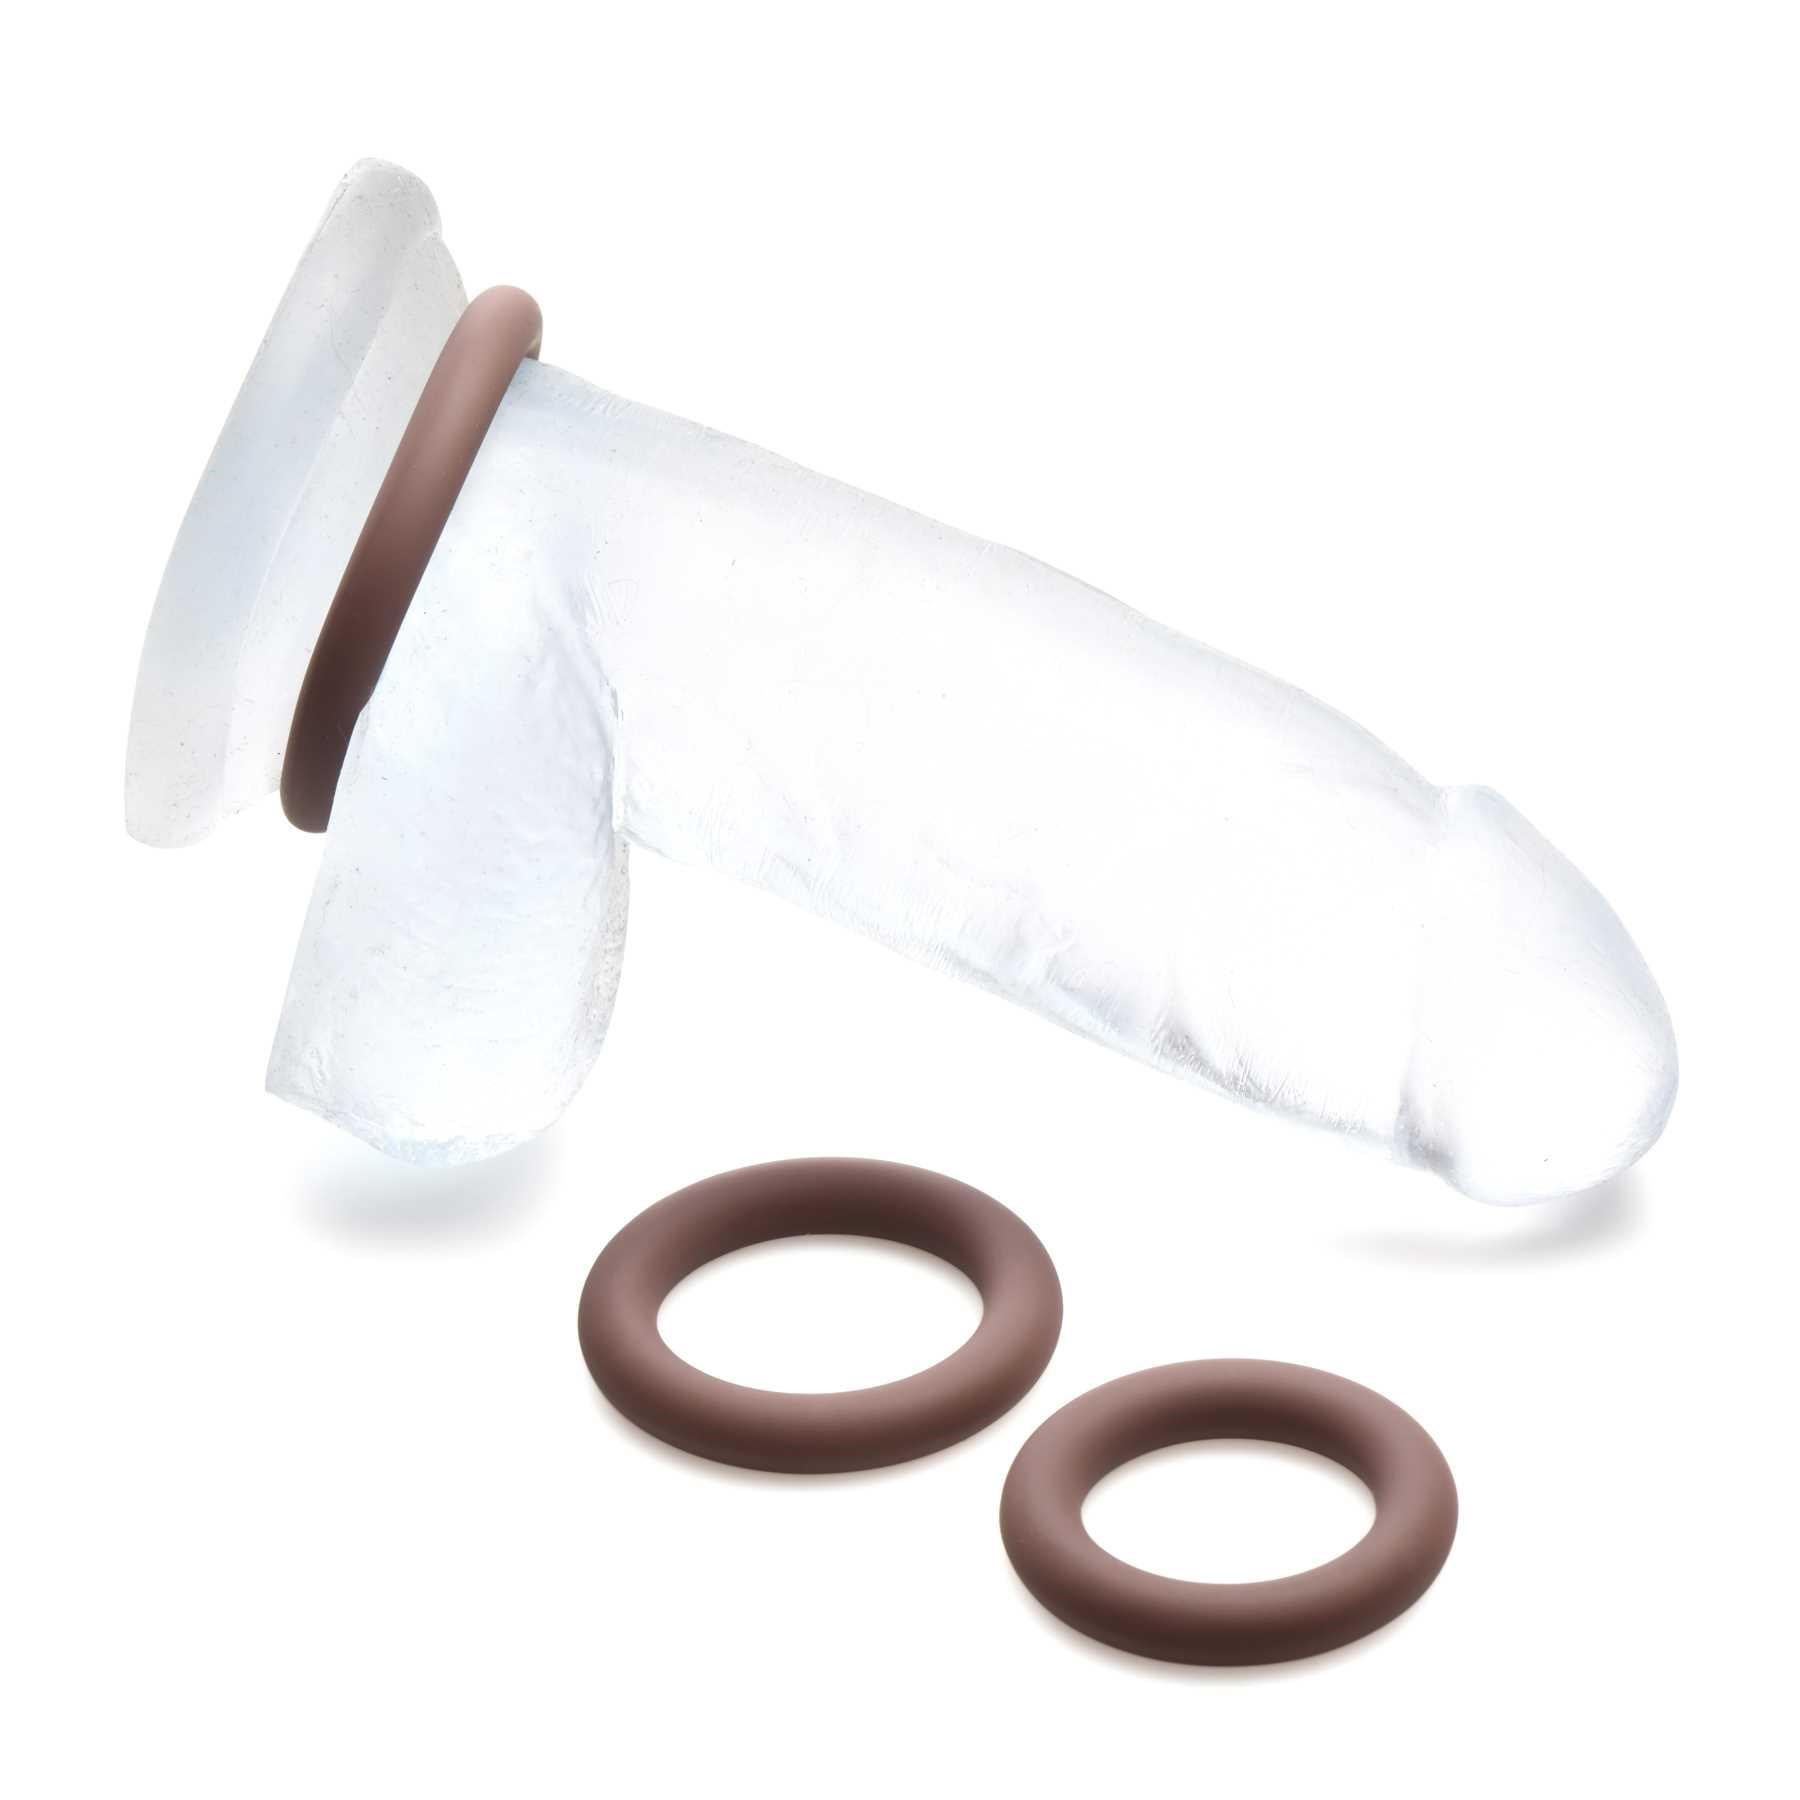 Jock Silicone Cock Ring Set brown with one ring on dildo and other 2 rings besides